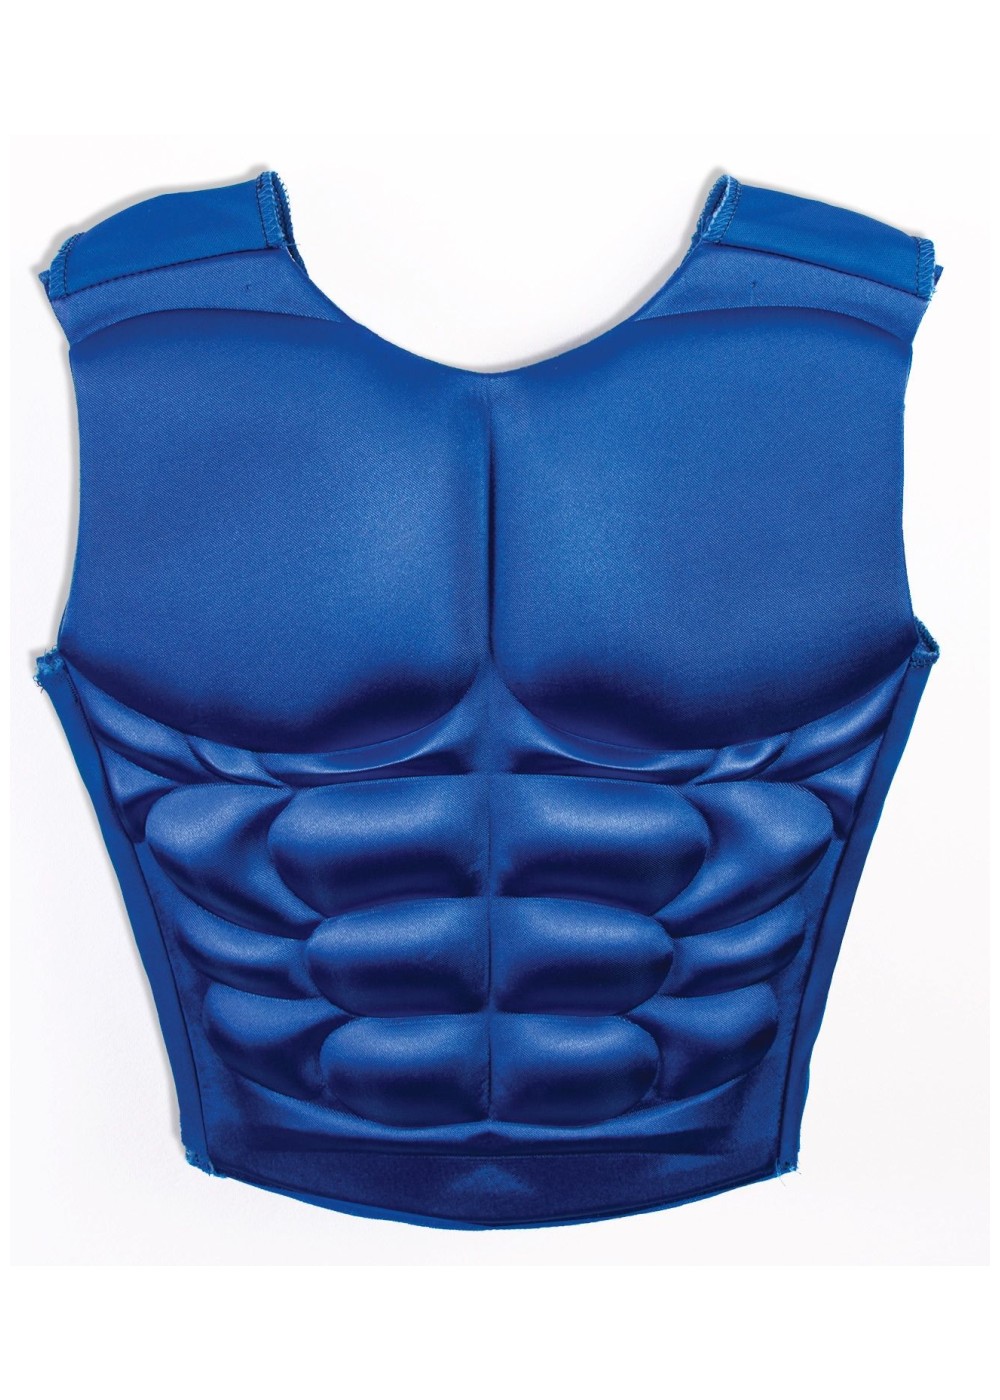 Superhero Boys Muscle Chest - Accessories